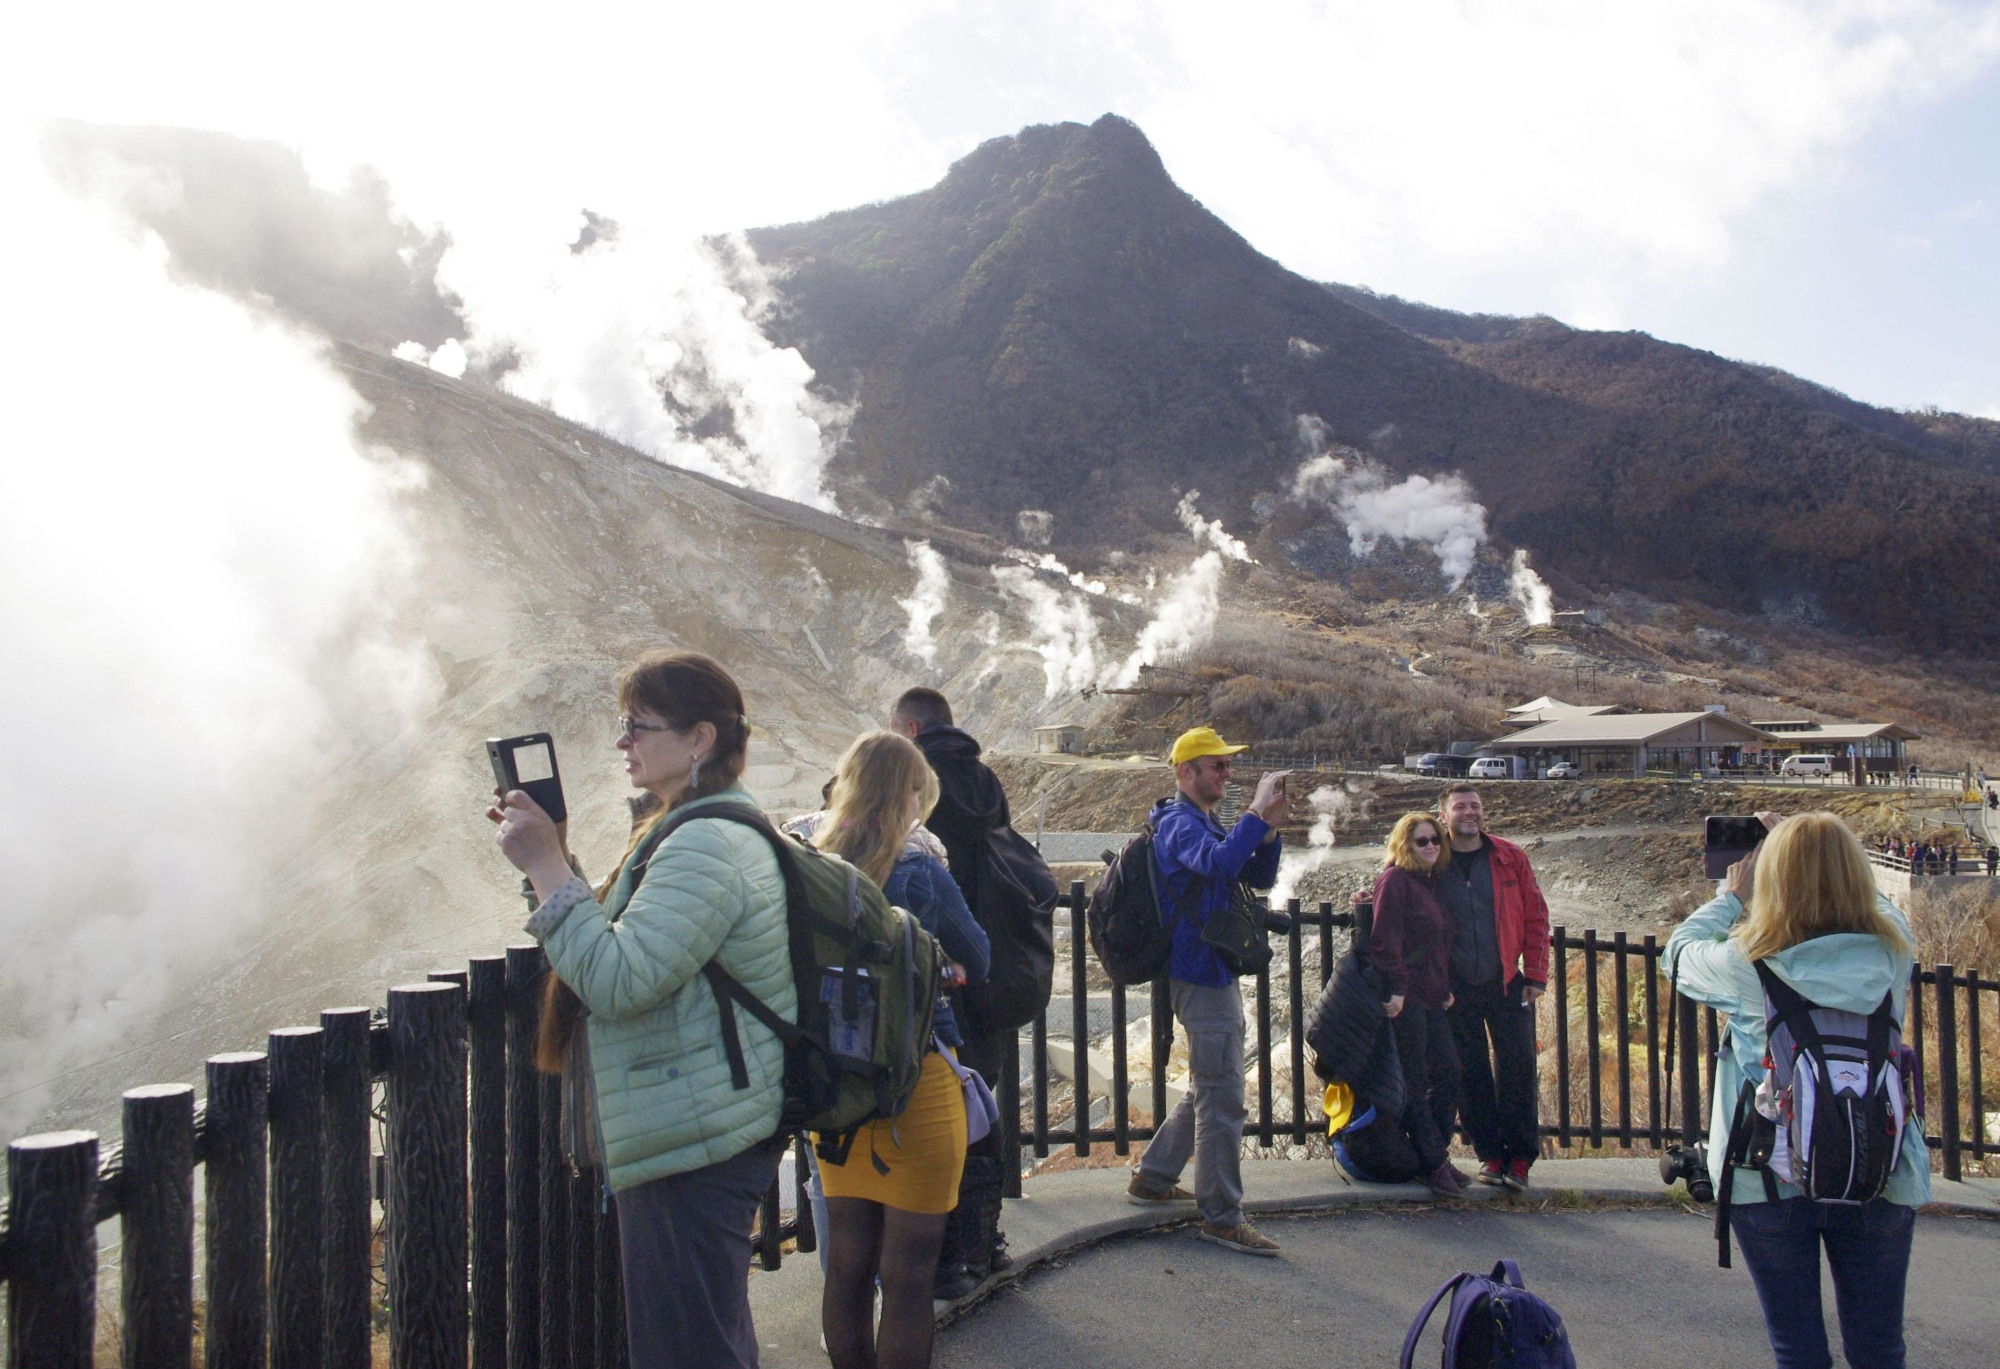 Tourists take pictures at the Owakudani area in Hakone, Kanagawa Prefecture, on Friday after it was reopened to the public following the lowering of the volcanic alert level for Mount Hakone. | KYODO